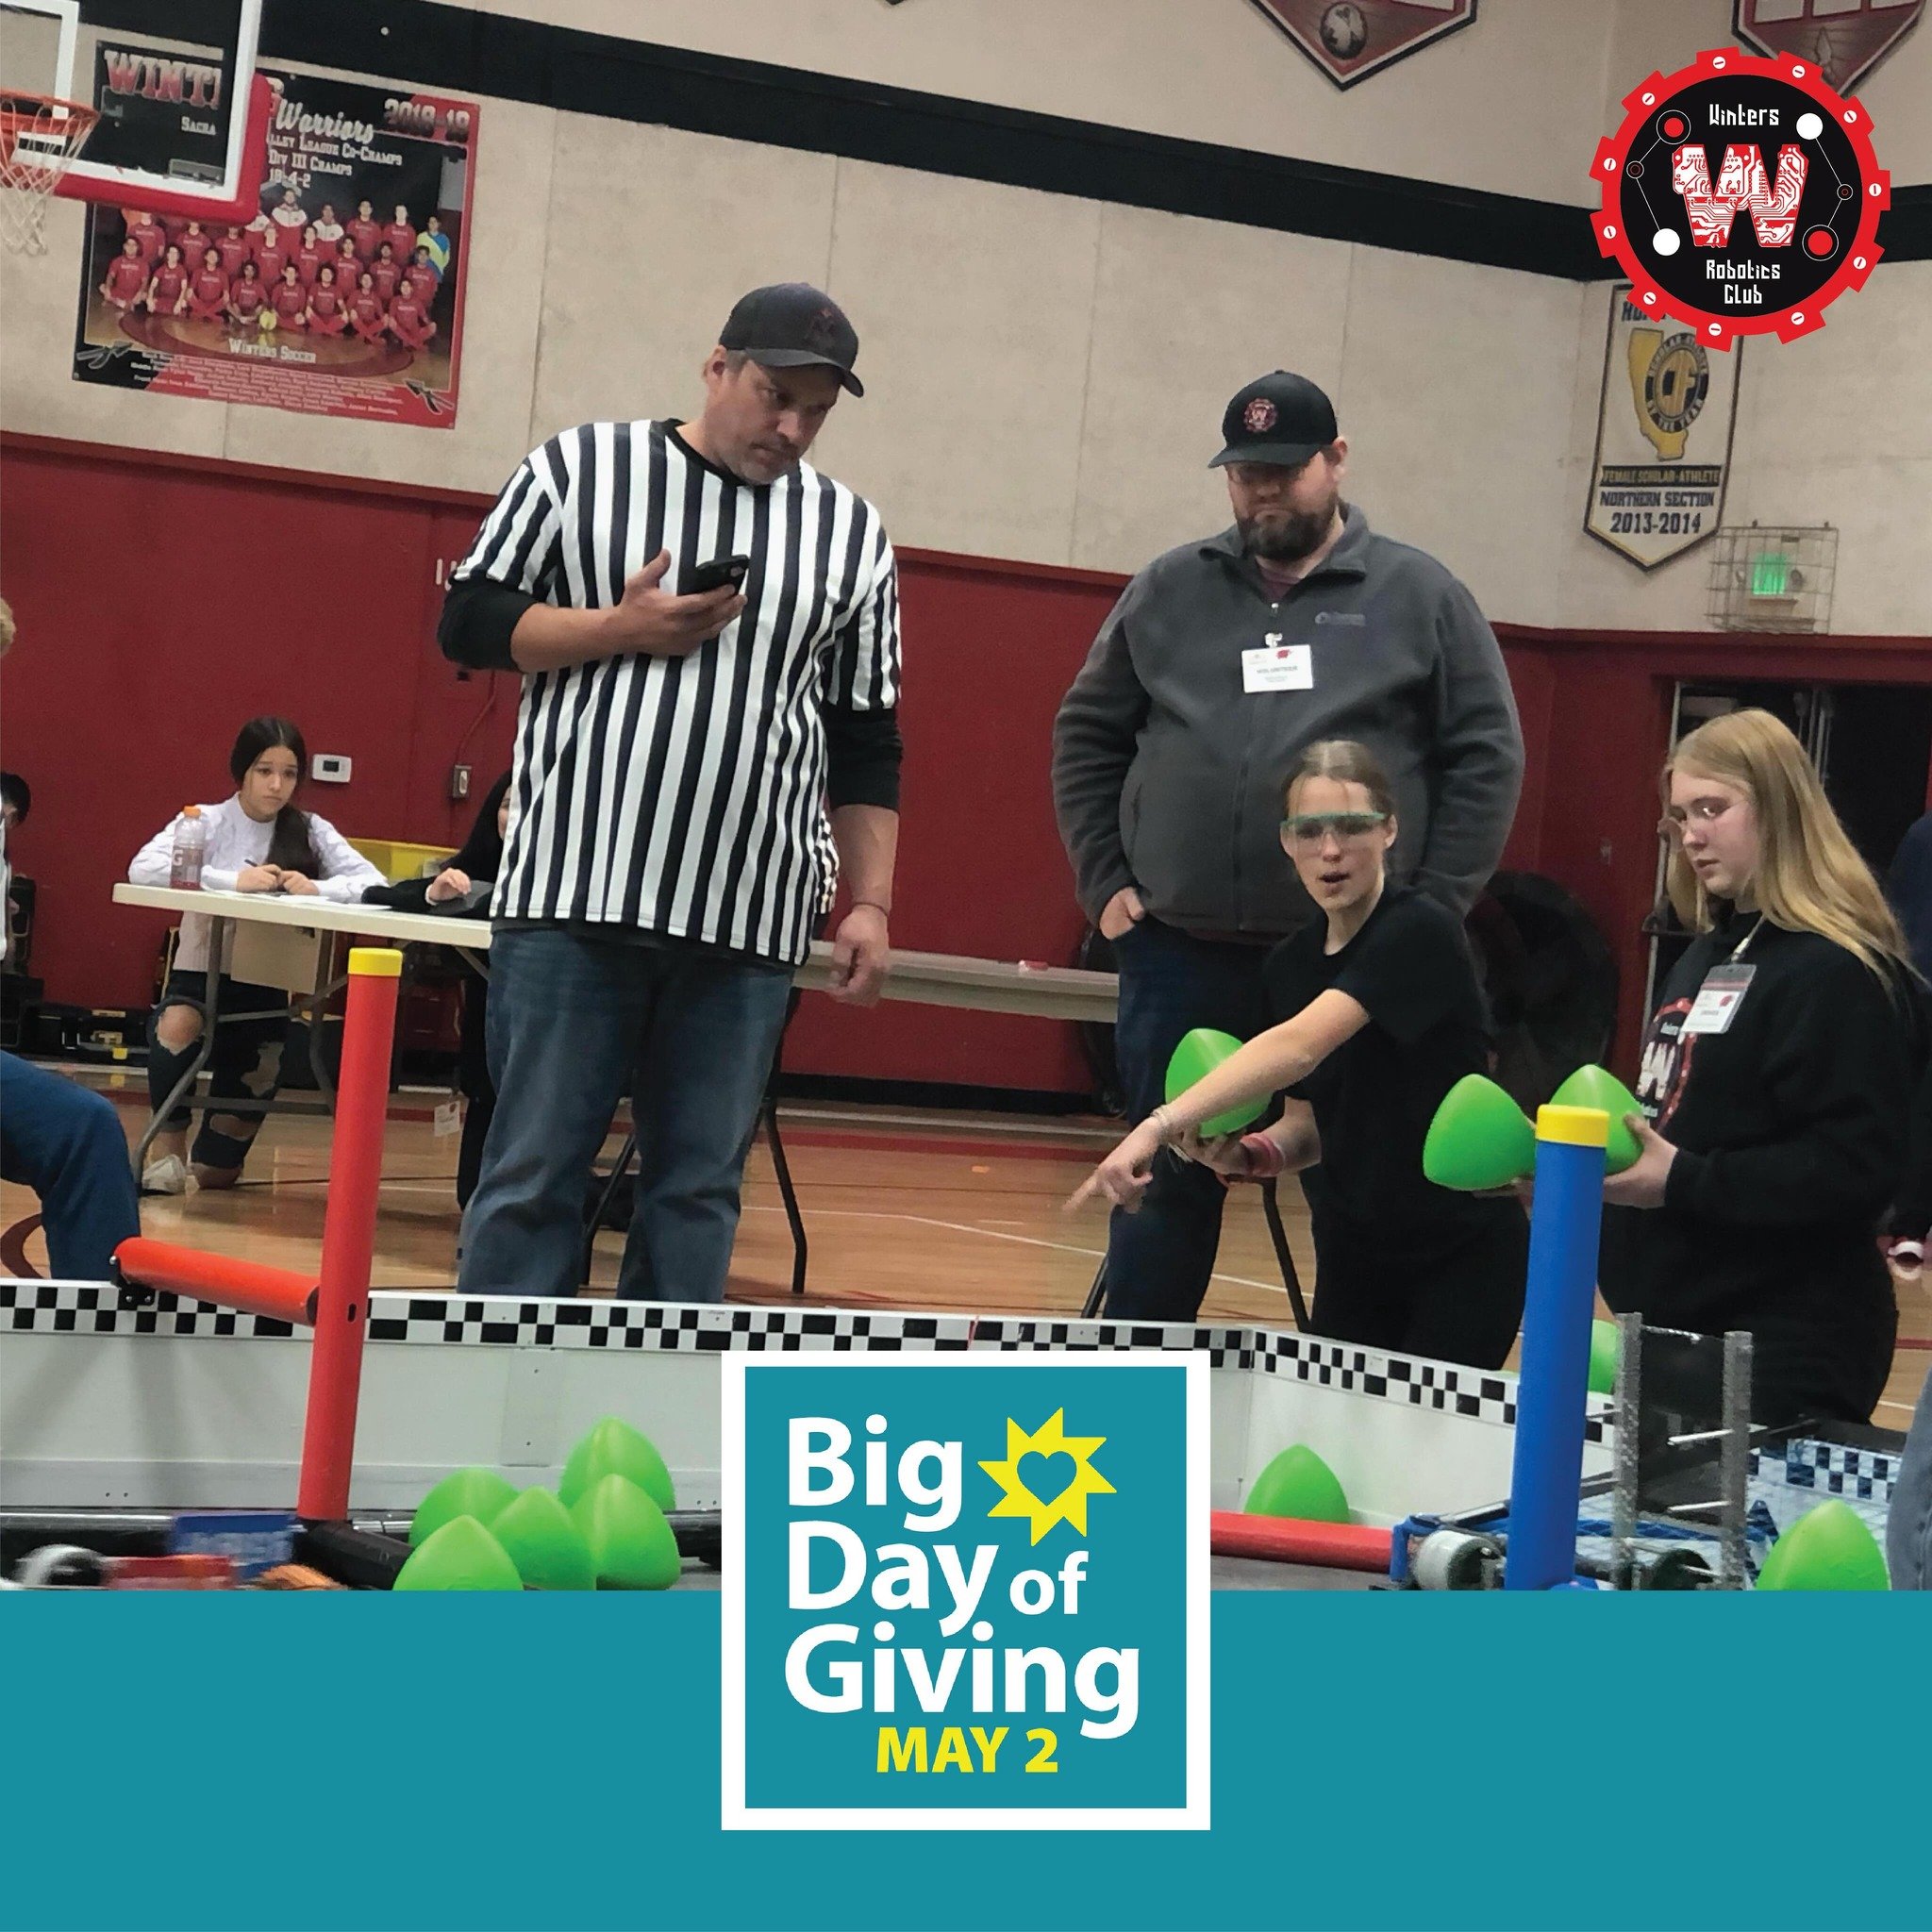 DOUBLE YOUR IMPACT for Winters Robotics by donating TODAY! A generous area donor is matching 100% of your donations up to $2500! Link in bio.

Together, your donations will help us build a sustainable engineering and robotics program for students in 